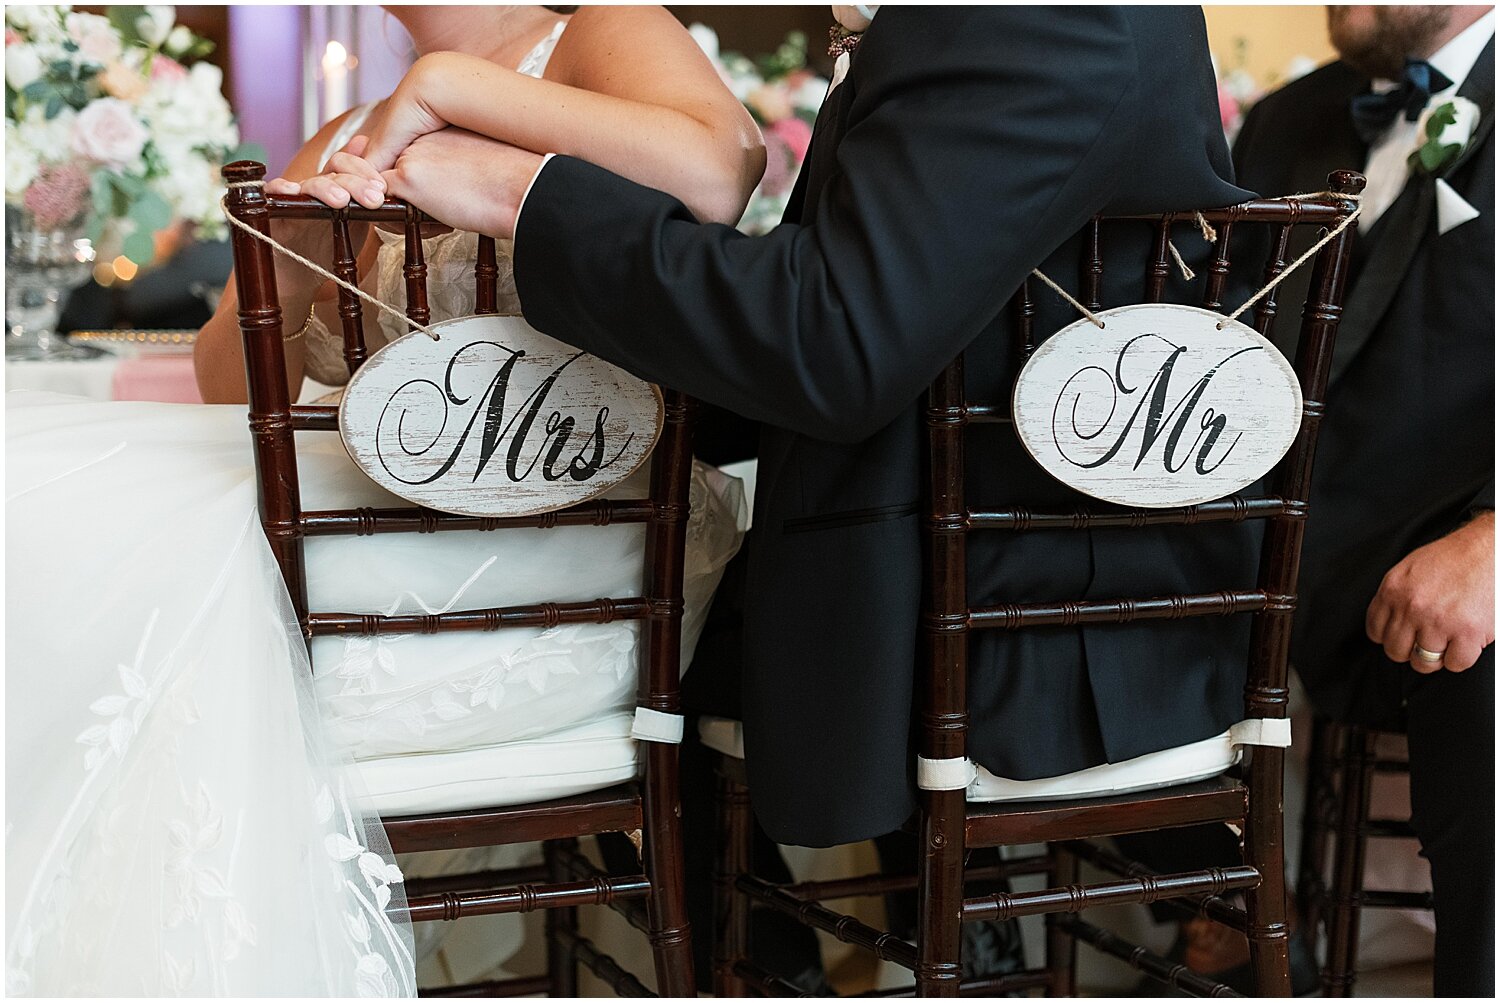  Mr and Mrs wedding sign  